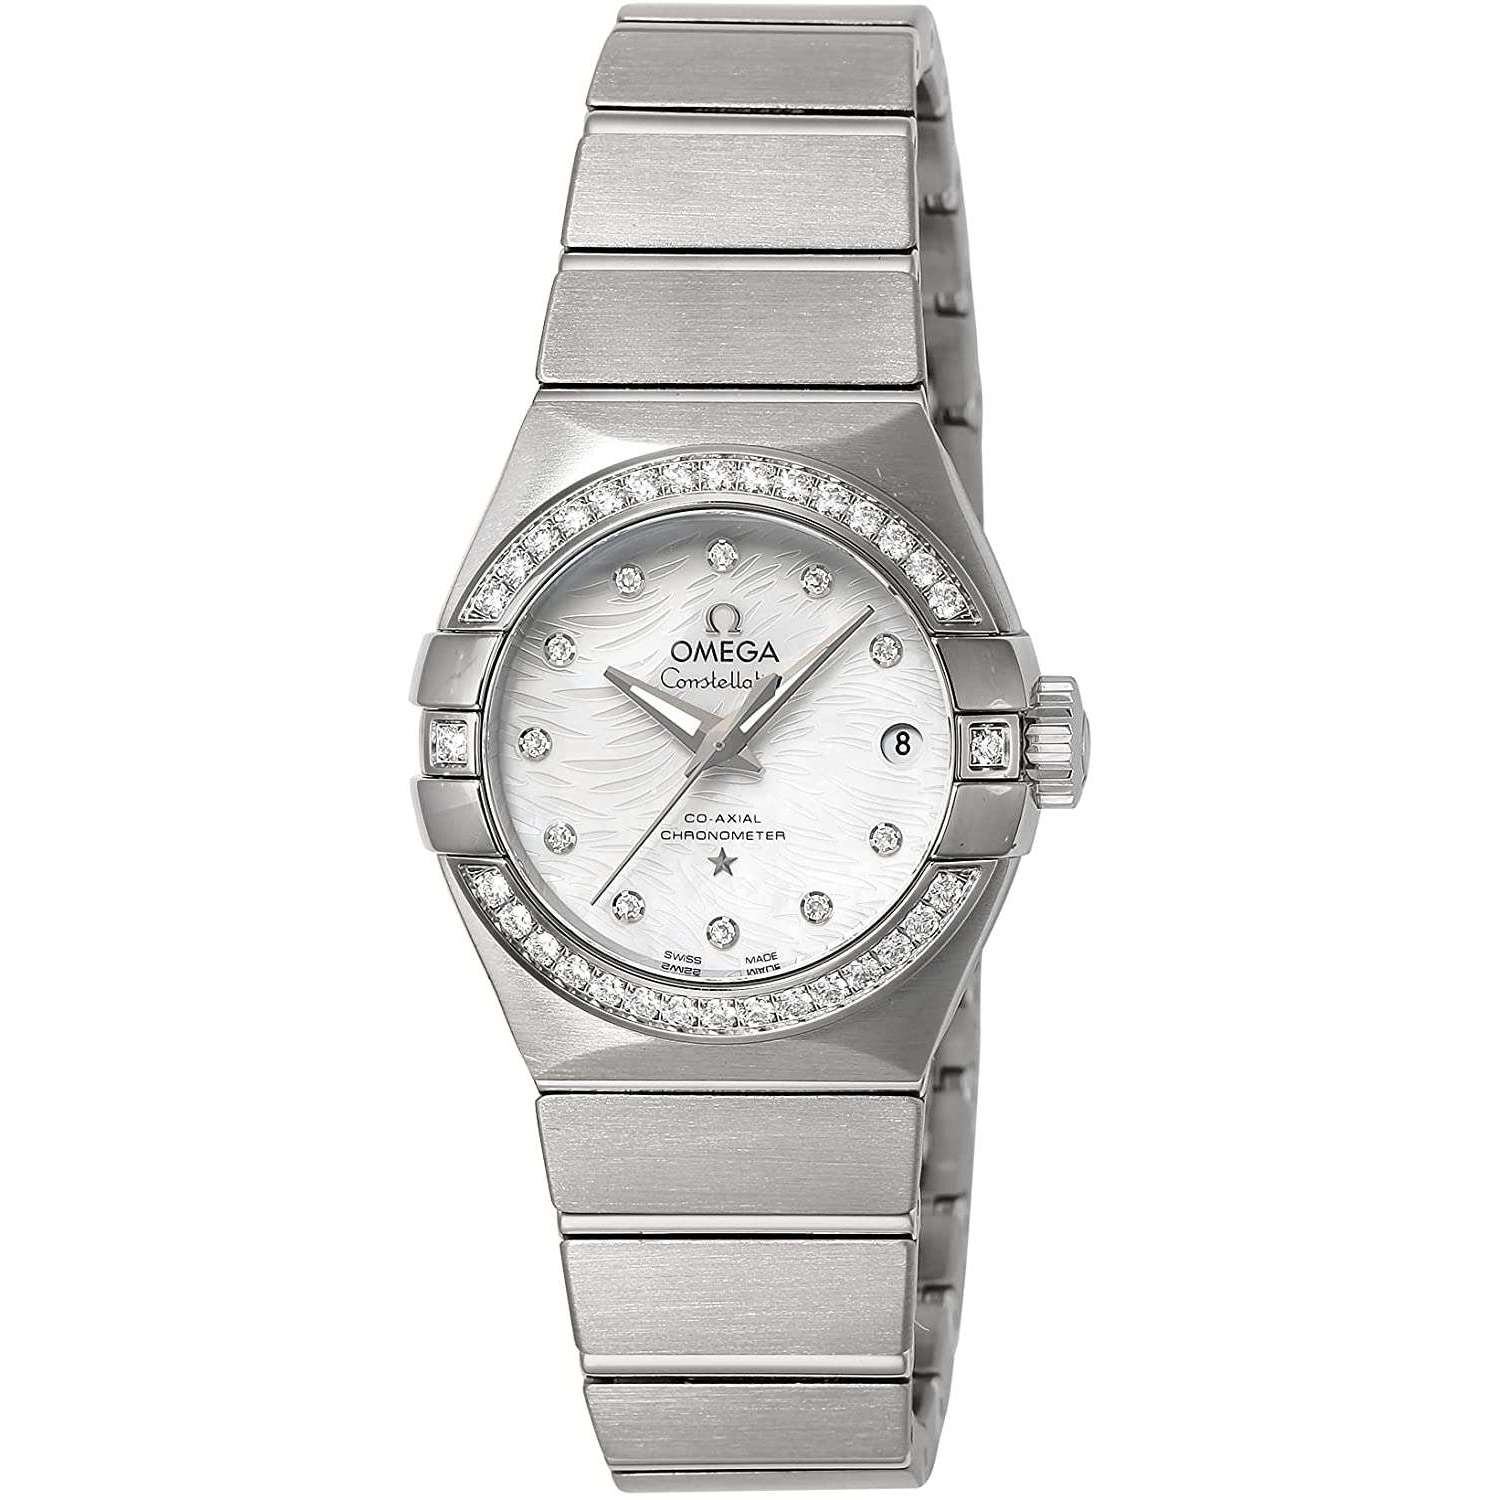 OMEGA CONSTELLATION CO-AXIAL CHRONOMETER 27 MM WOMEN WATCH 123.15.27.20.55.003 - ROOK JAPAN